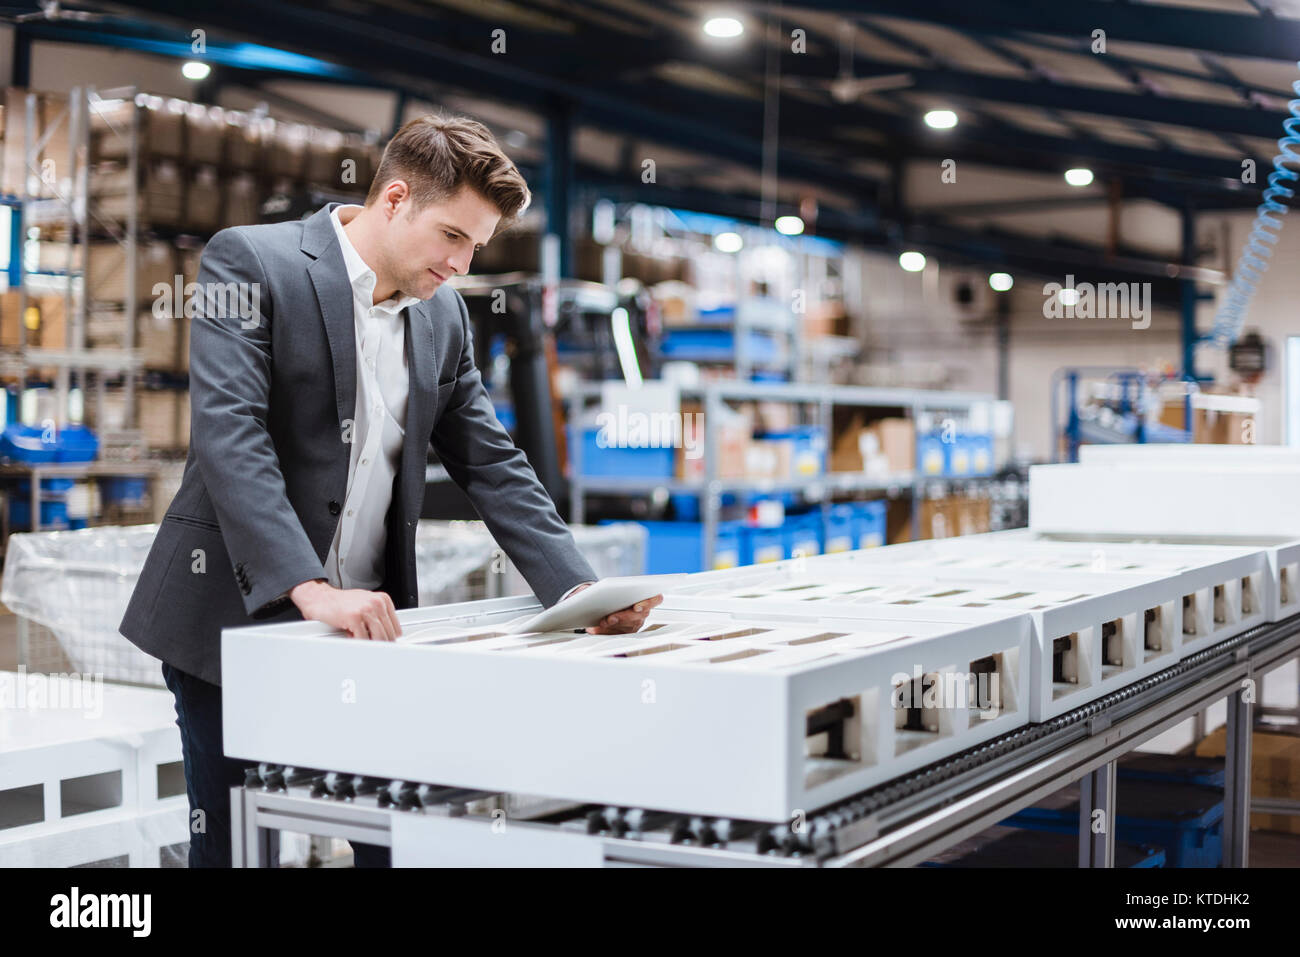 Young manager standing in shop floor reading papers Stock Photo